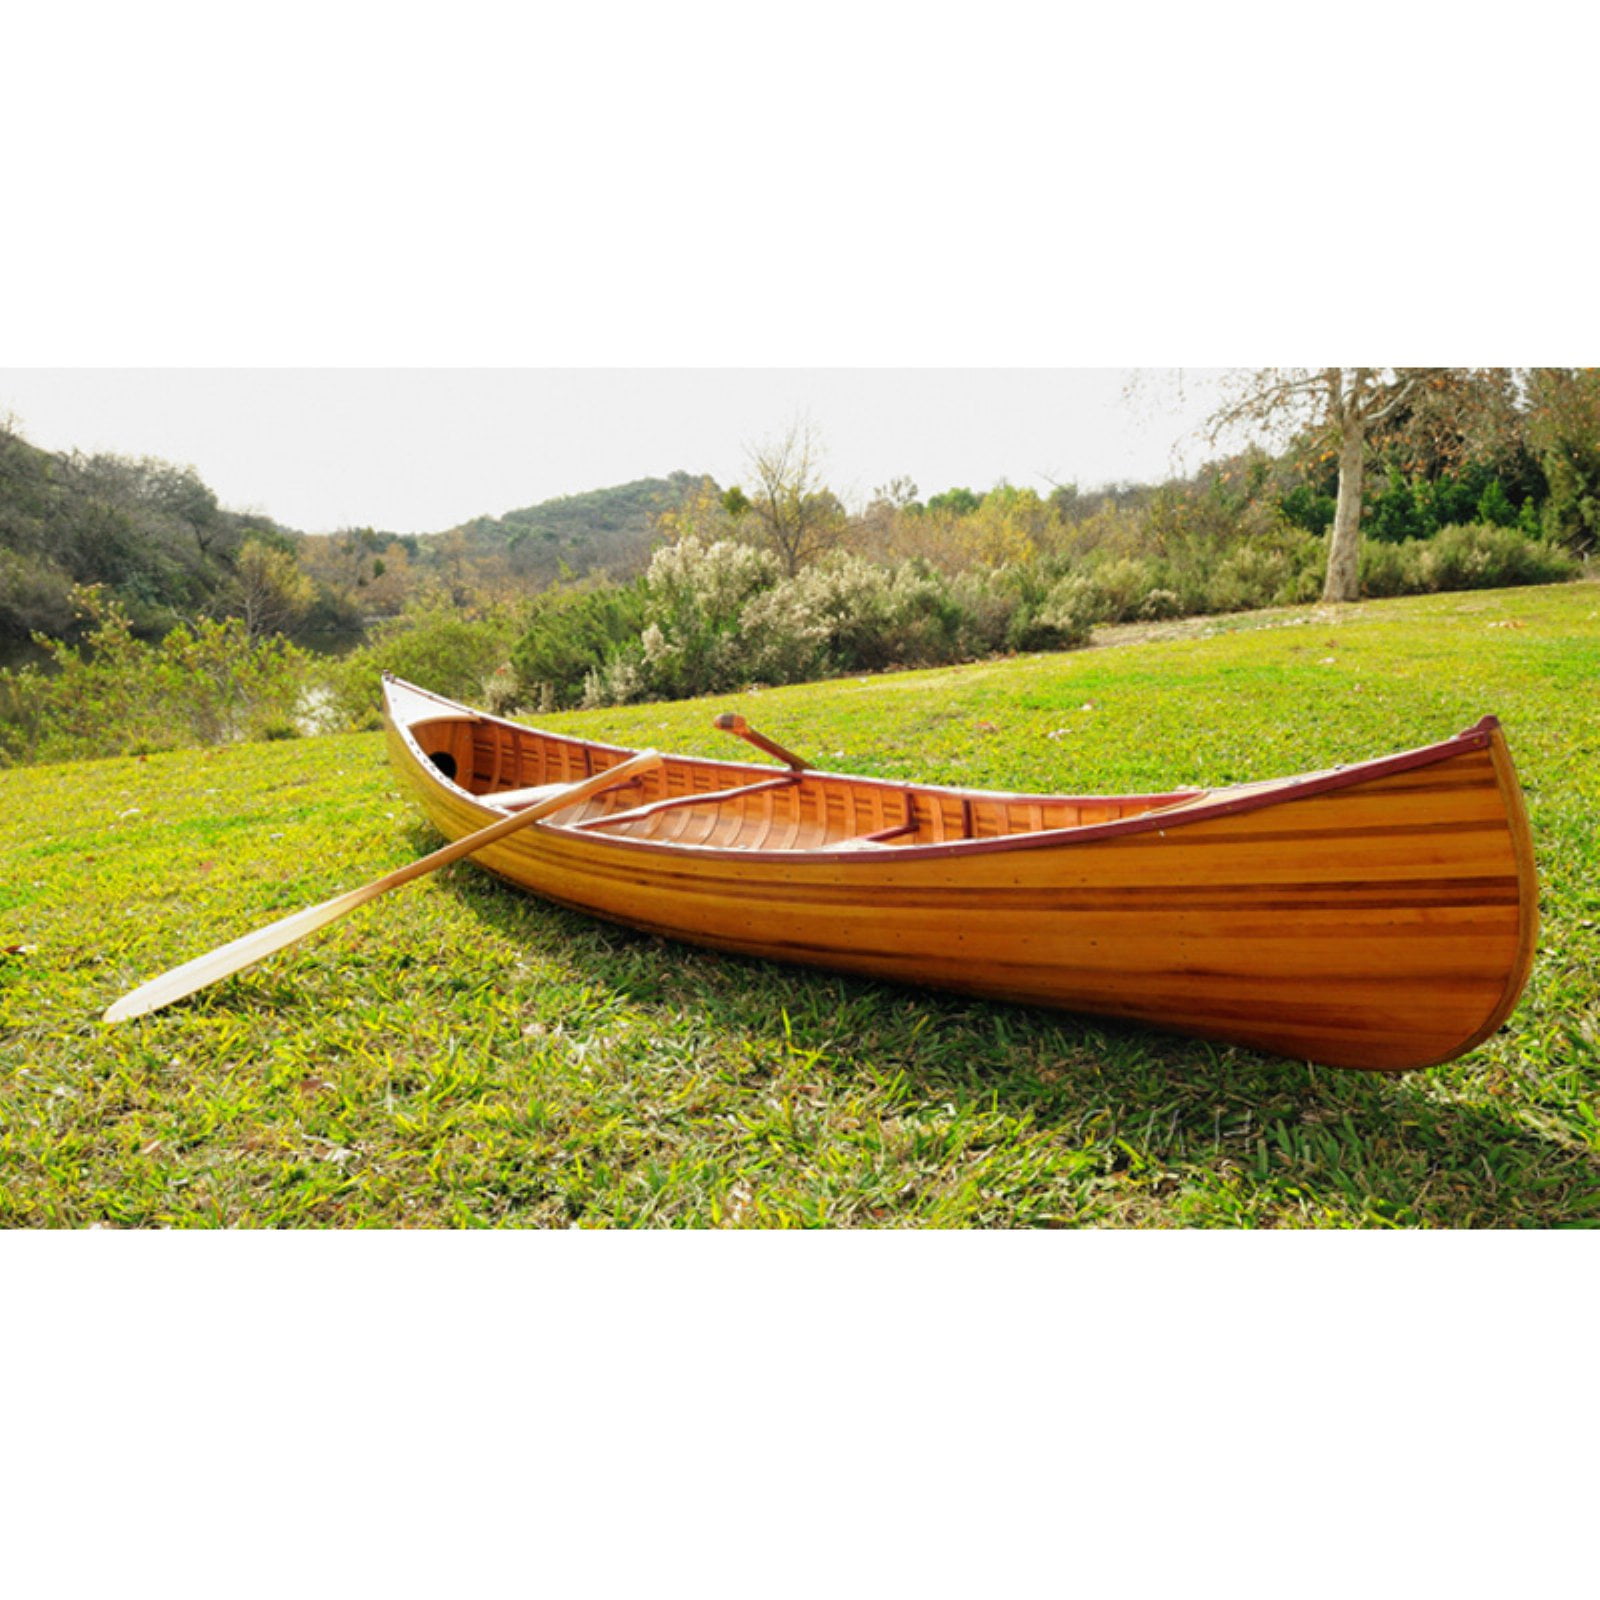 Real Canoe with Ribs Curved Bow 12 Ft Cedar Hull Wood Paddles & Cover Assembly 